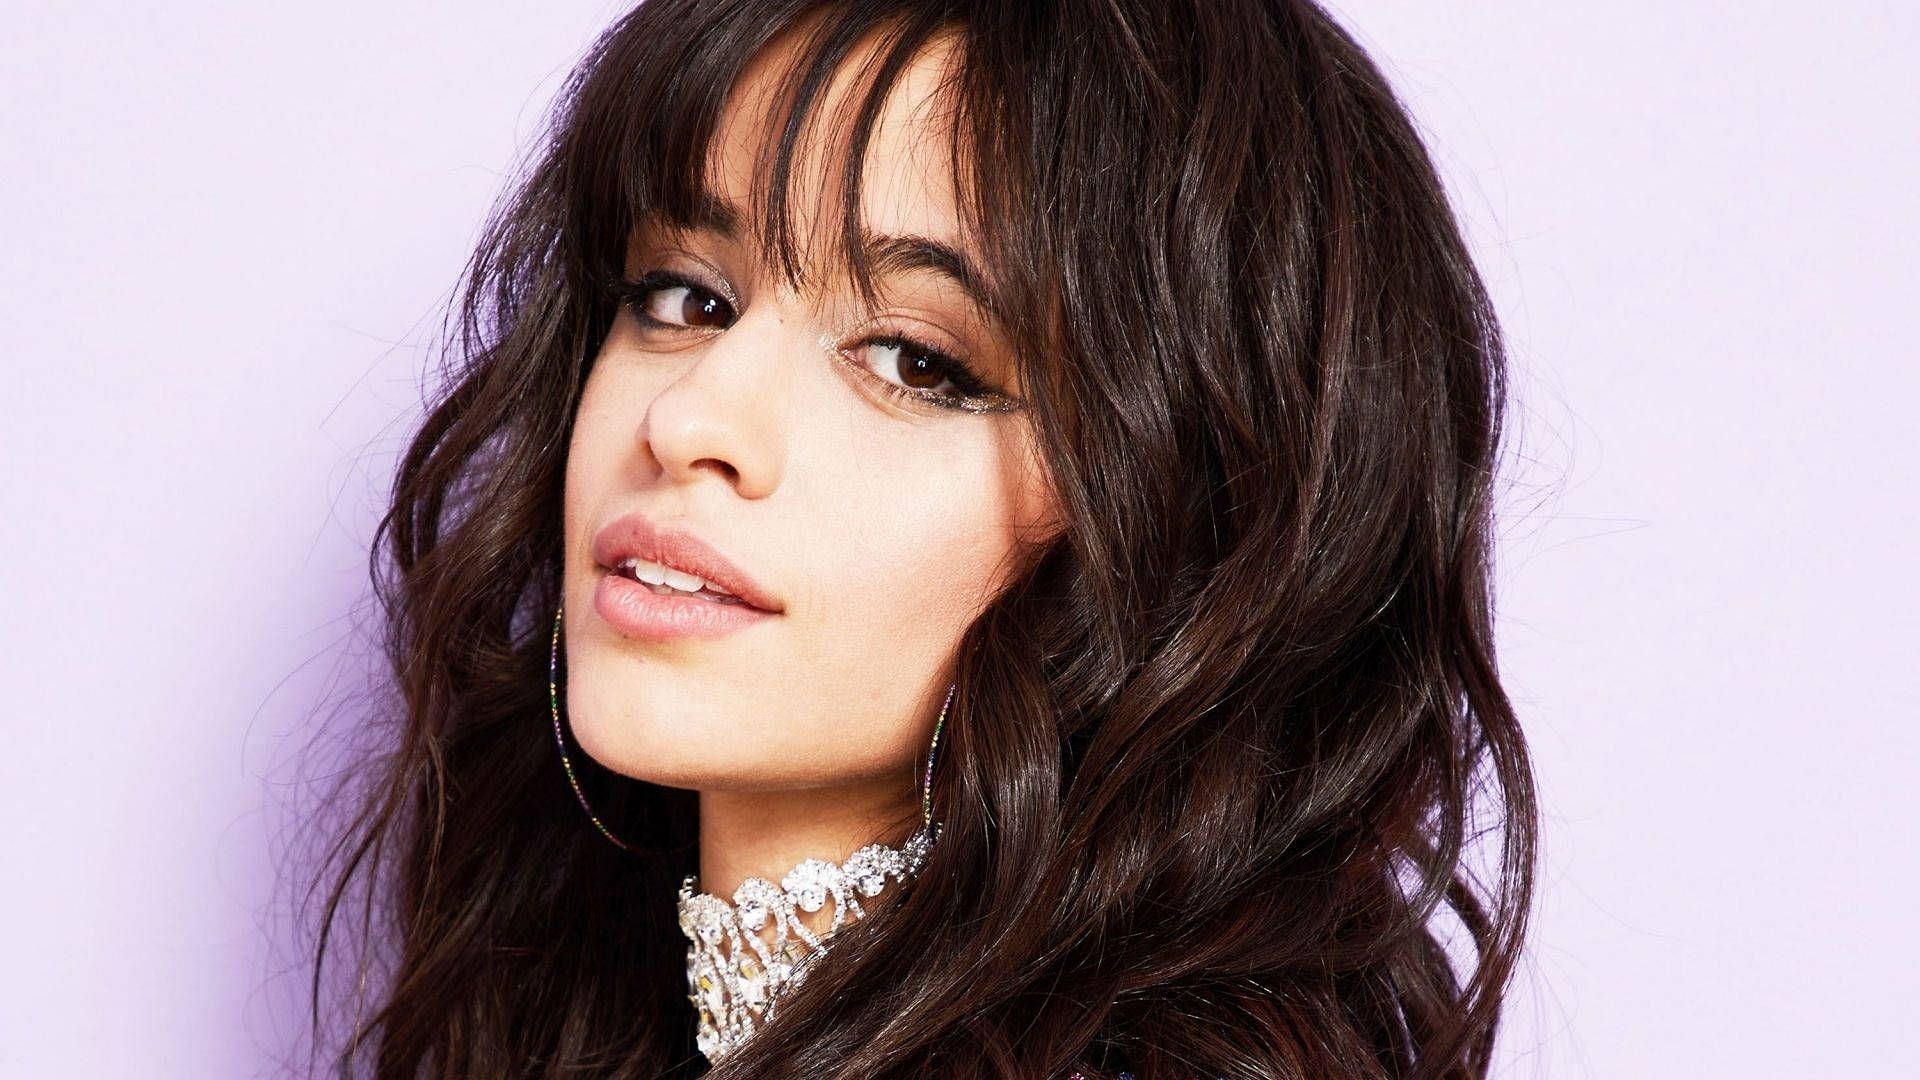 Camila is one of the celebrities with OCD who initially struggled with fear of stigma. (Image via Gettyimages/ Getty)